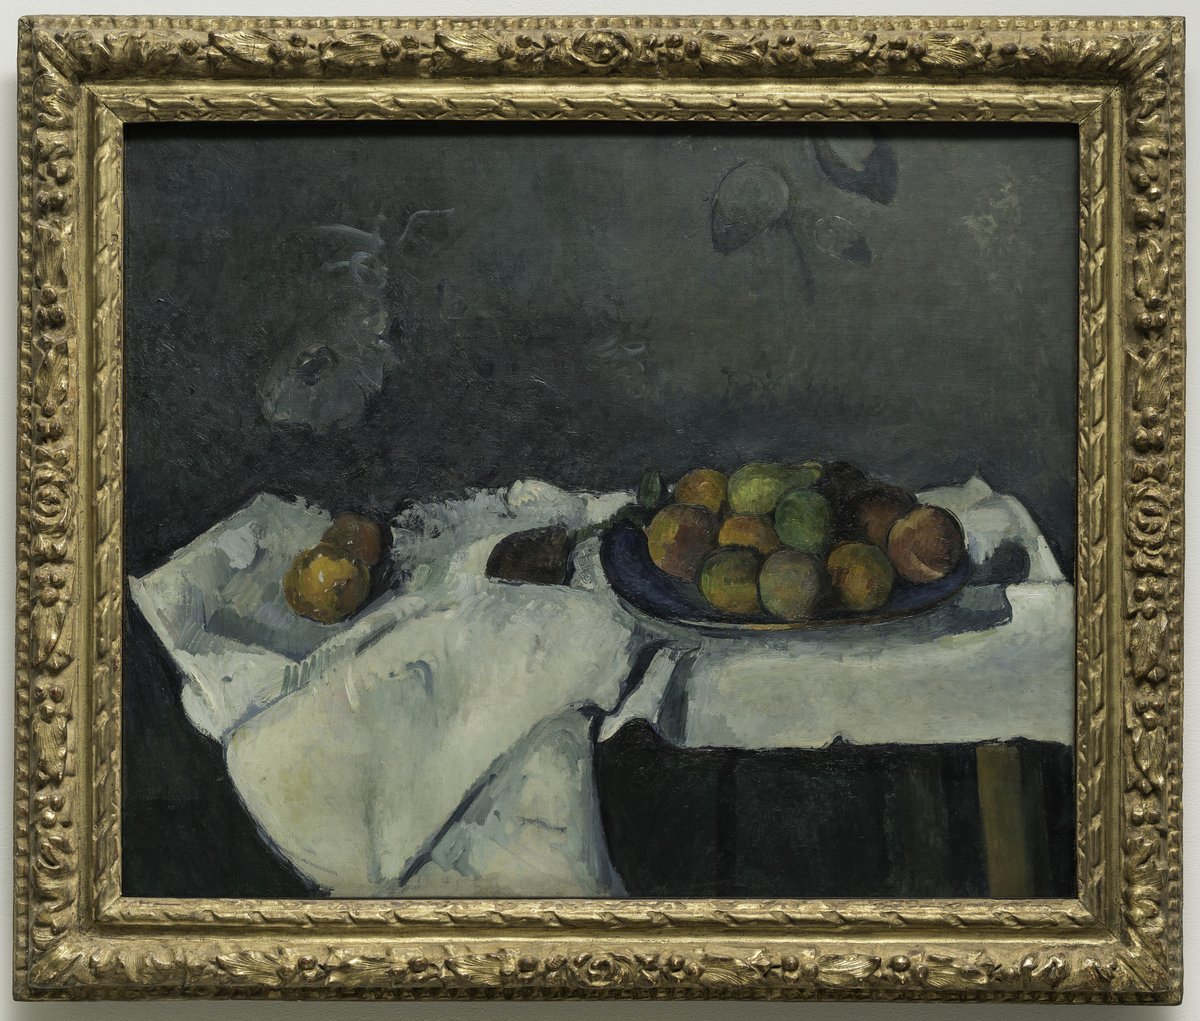 #PaulCézanne's fruit still lifes are marked by vibrant colors, geometric shapes, and dynamic compositions. Departing from a traditional perspective, he captures the subtle interplay of light and shadow.

🎨 : Paul Cézanne, 'Still Life: Plate of Peaches,' ca. 1879–80.